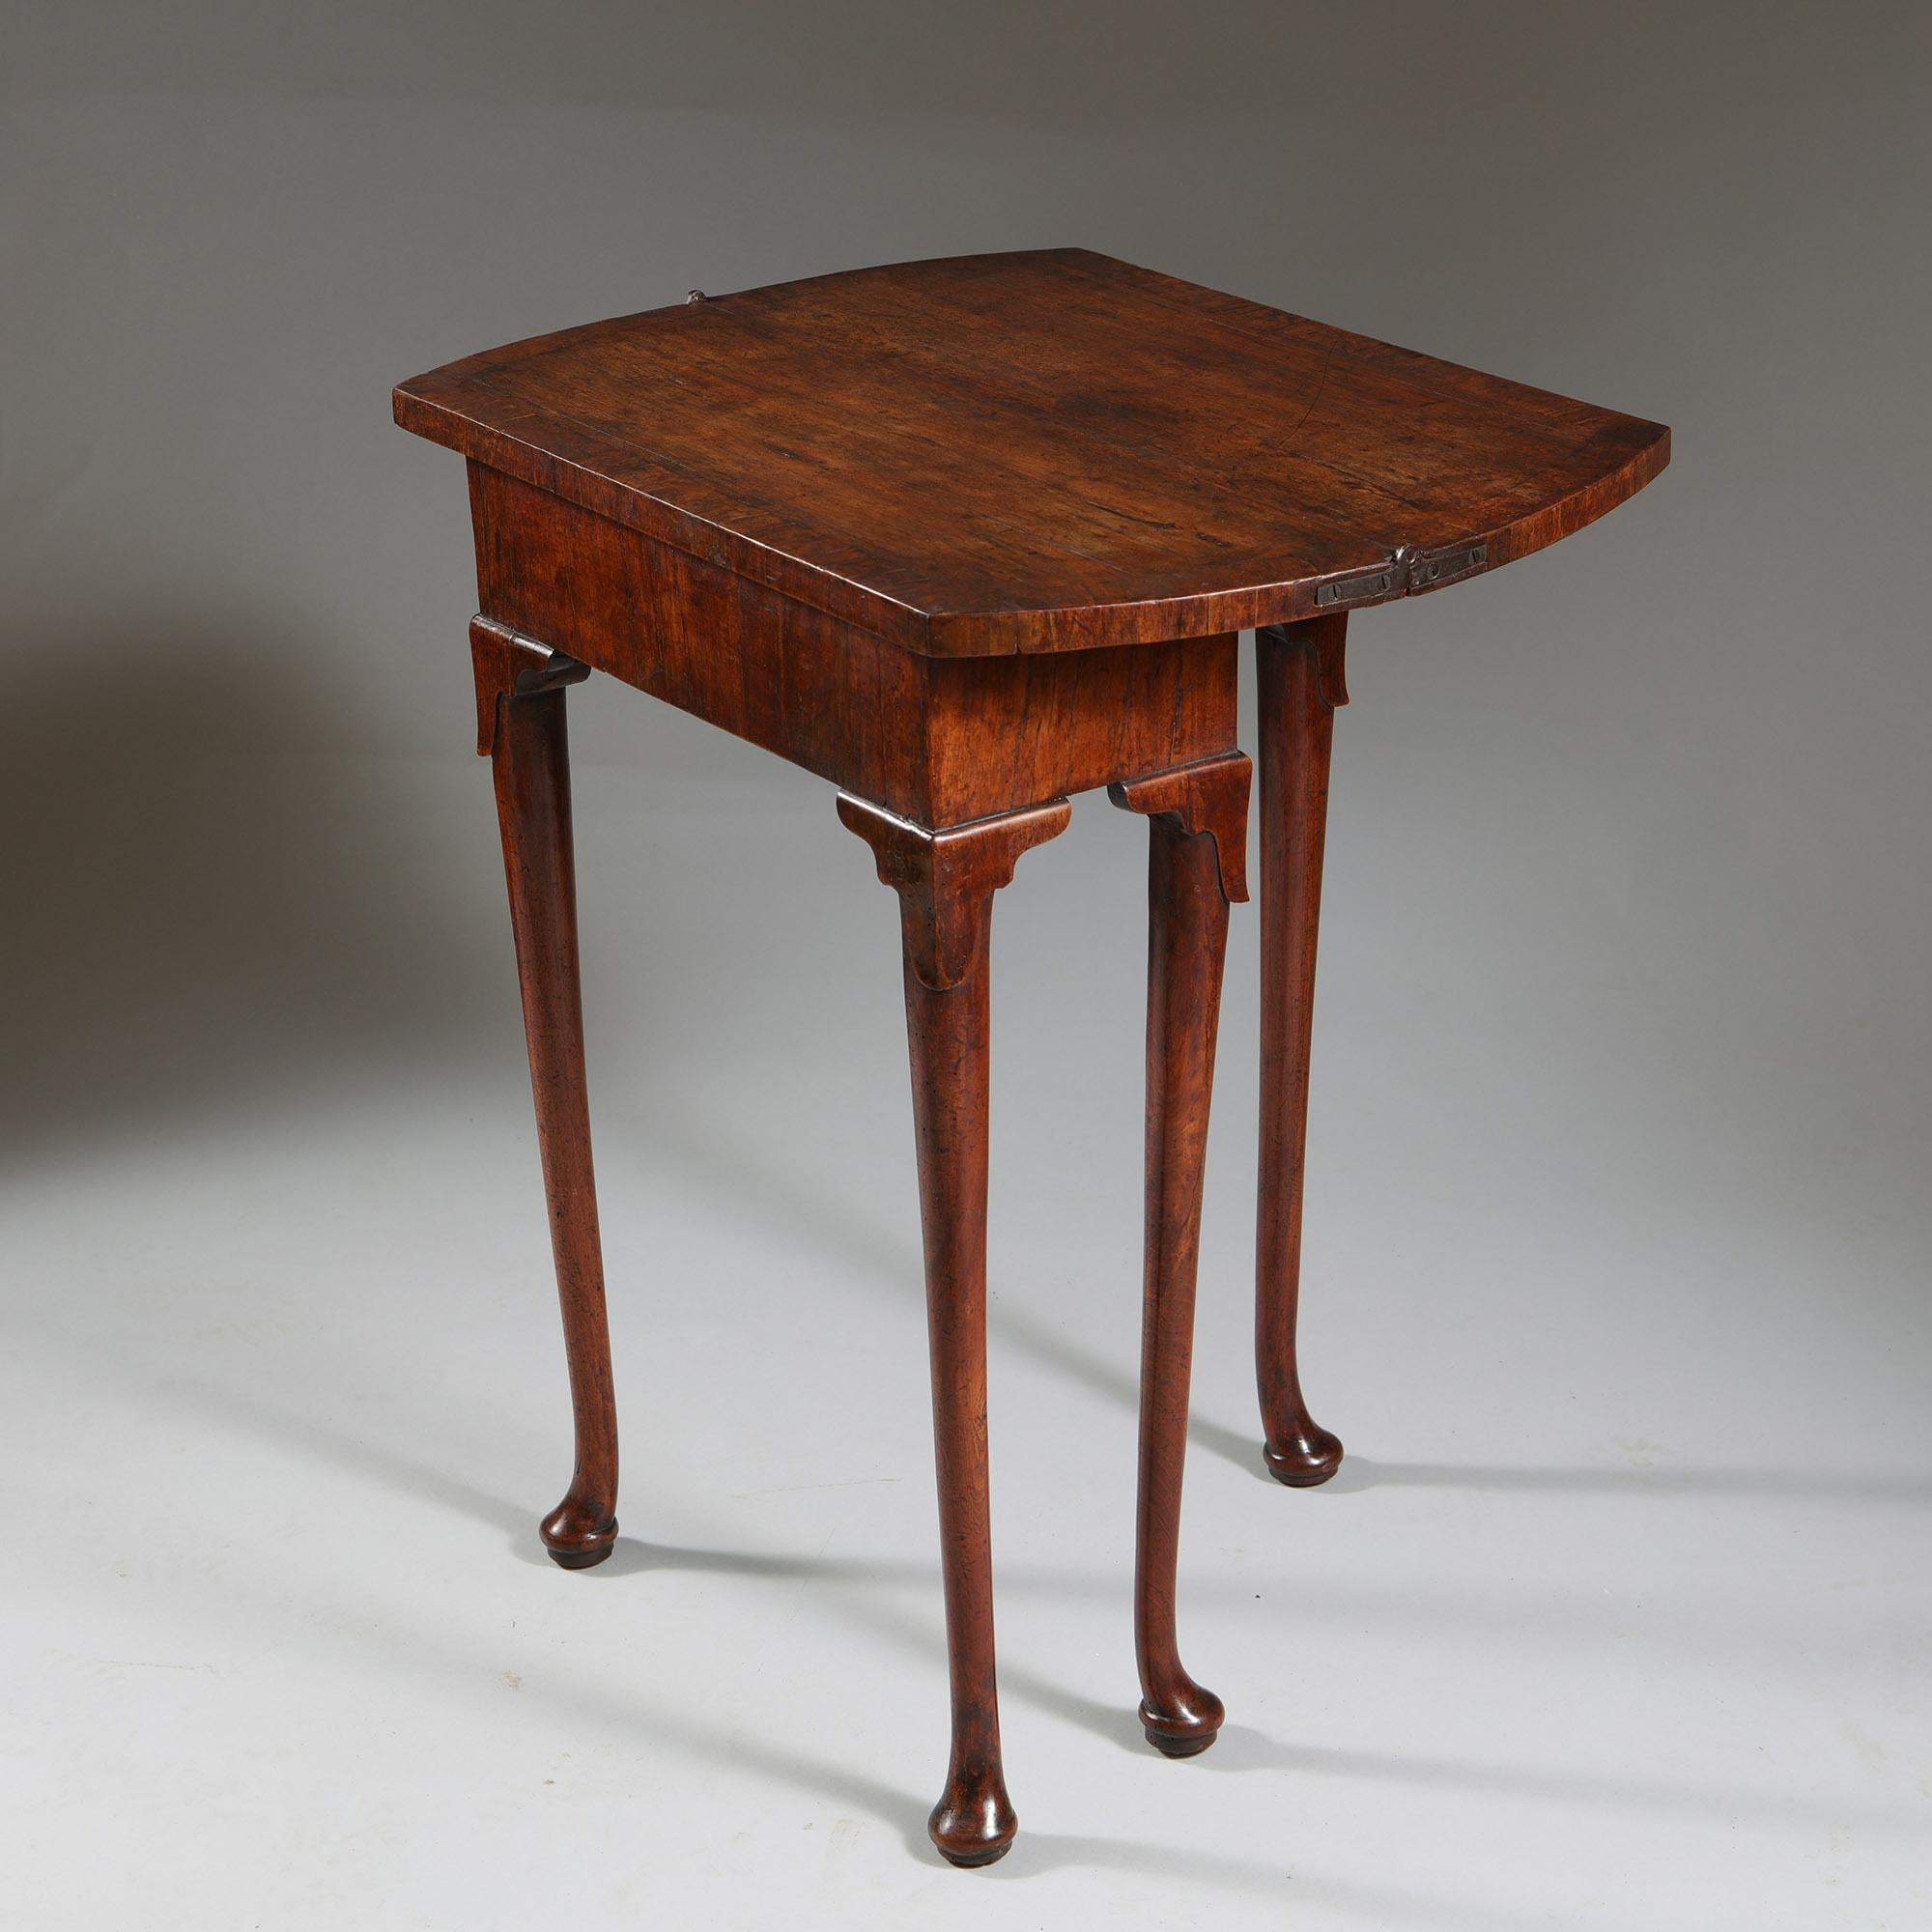 A Unique Early 18th Century Diminutive George I Figured Walnut Bachelors Table In Good Condition For Sale In Oxfordshire, United Kingdom